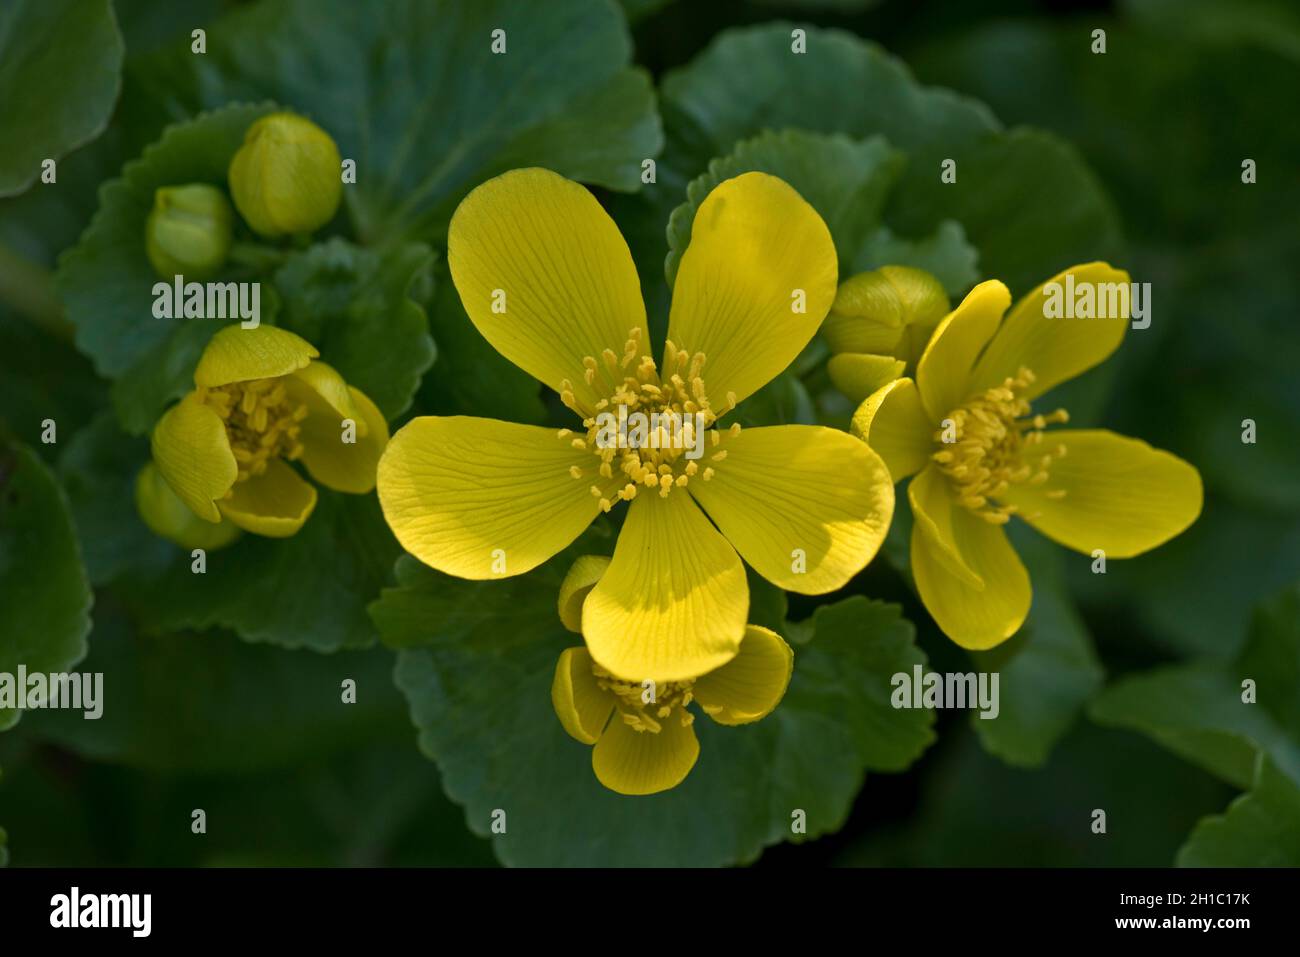 Marsh marigold or kingcup (Caltha palustris) yellow flowers of a perennial wild and cultivated plant of damp areas, Berkshire, March Stock Photo